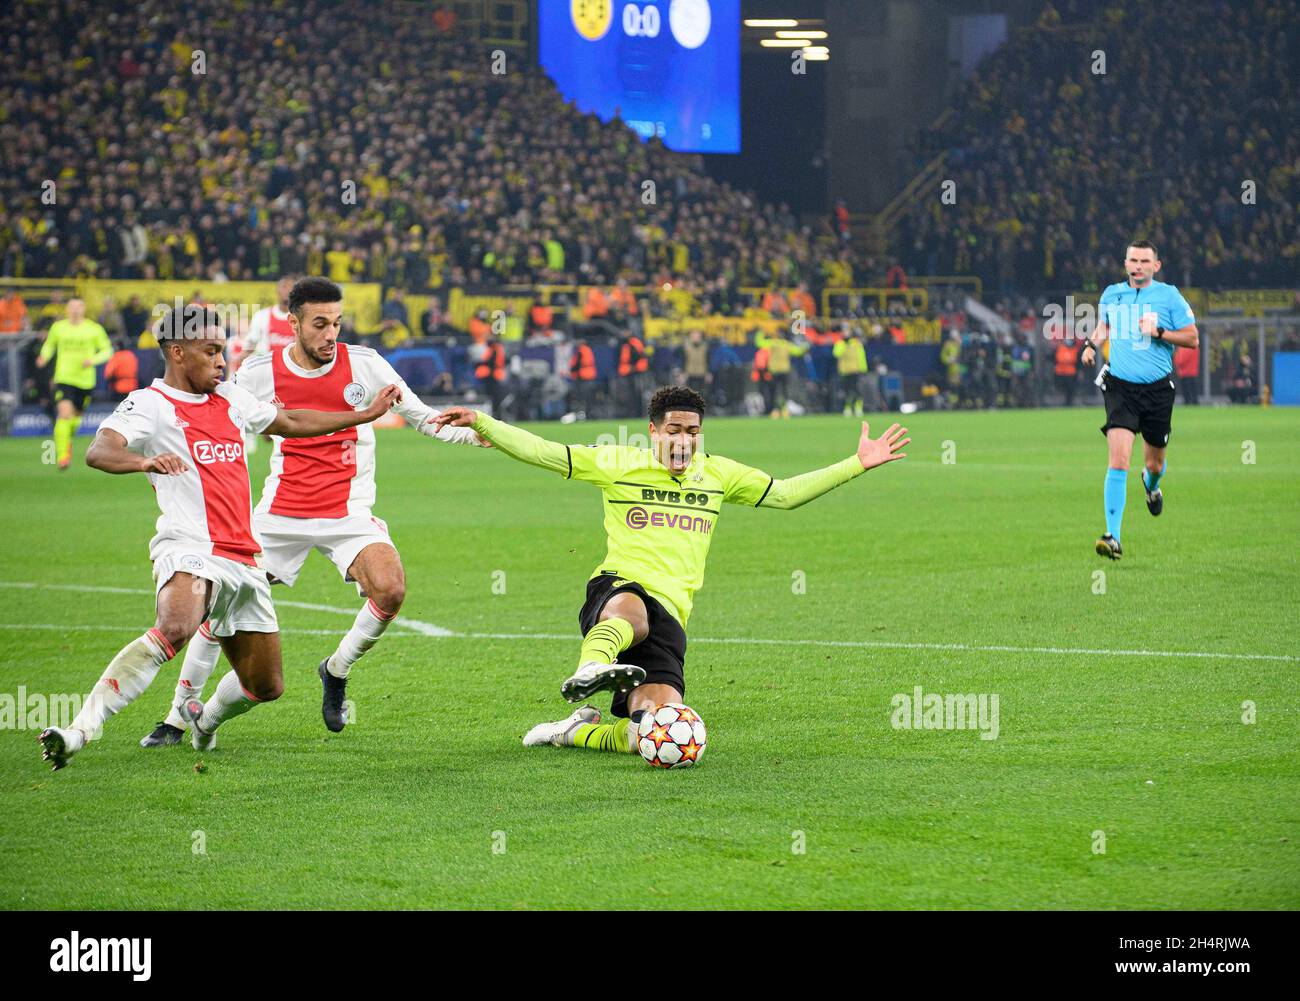 Noussair MAZRAOUI (Ajax) fouls Jude BELLINGHAM r. (DO) in the penalty area after VAR gives it penalty, action, duels, l. Jurrien TIMBER (Ajax) Soccer Champions League, preliminary round 4th matchday, Borussia Dortmund (DO) - Ajax Amsterdam, on November 3rd, 2021 in Dortmund/Germany. Â Stock Photo